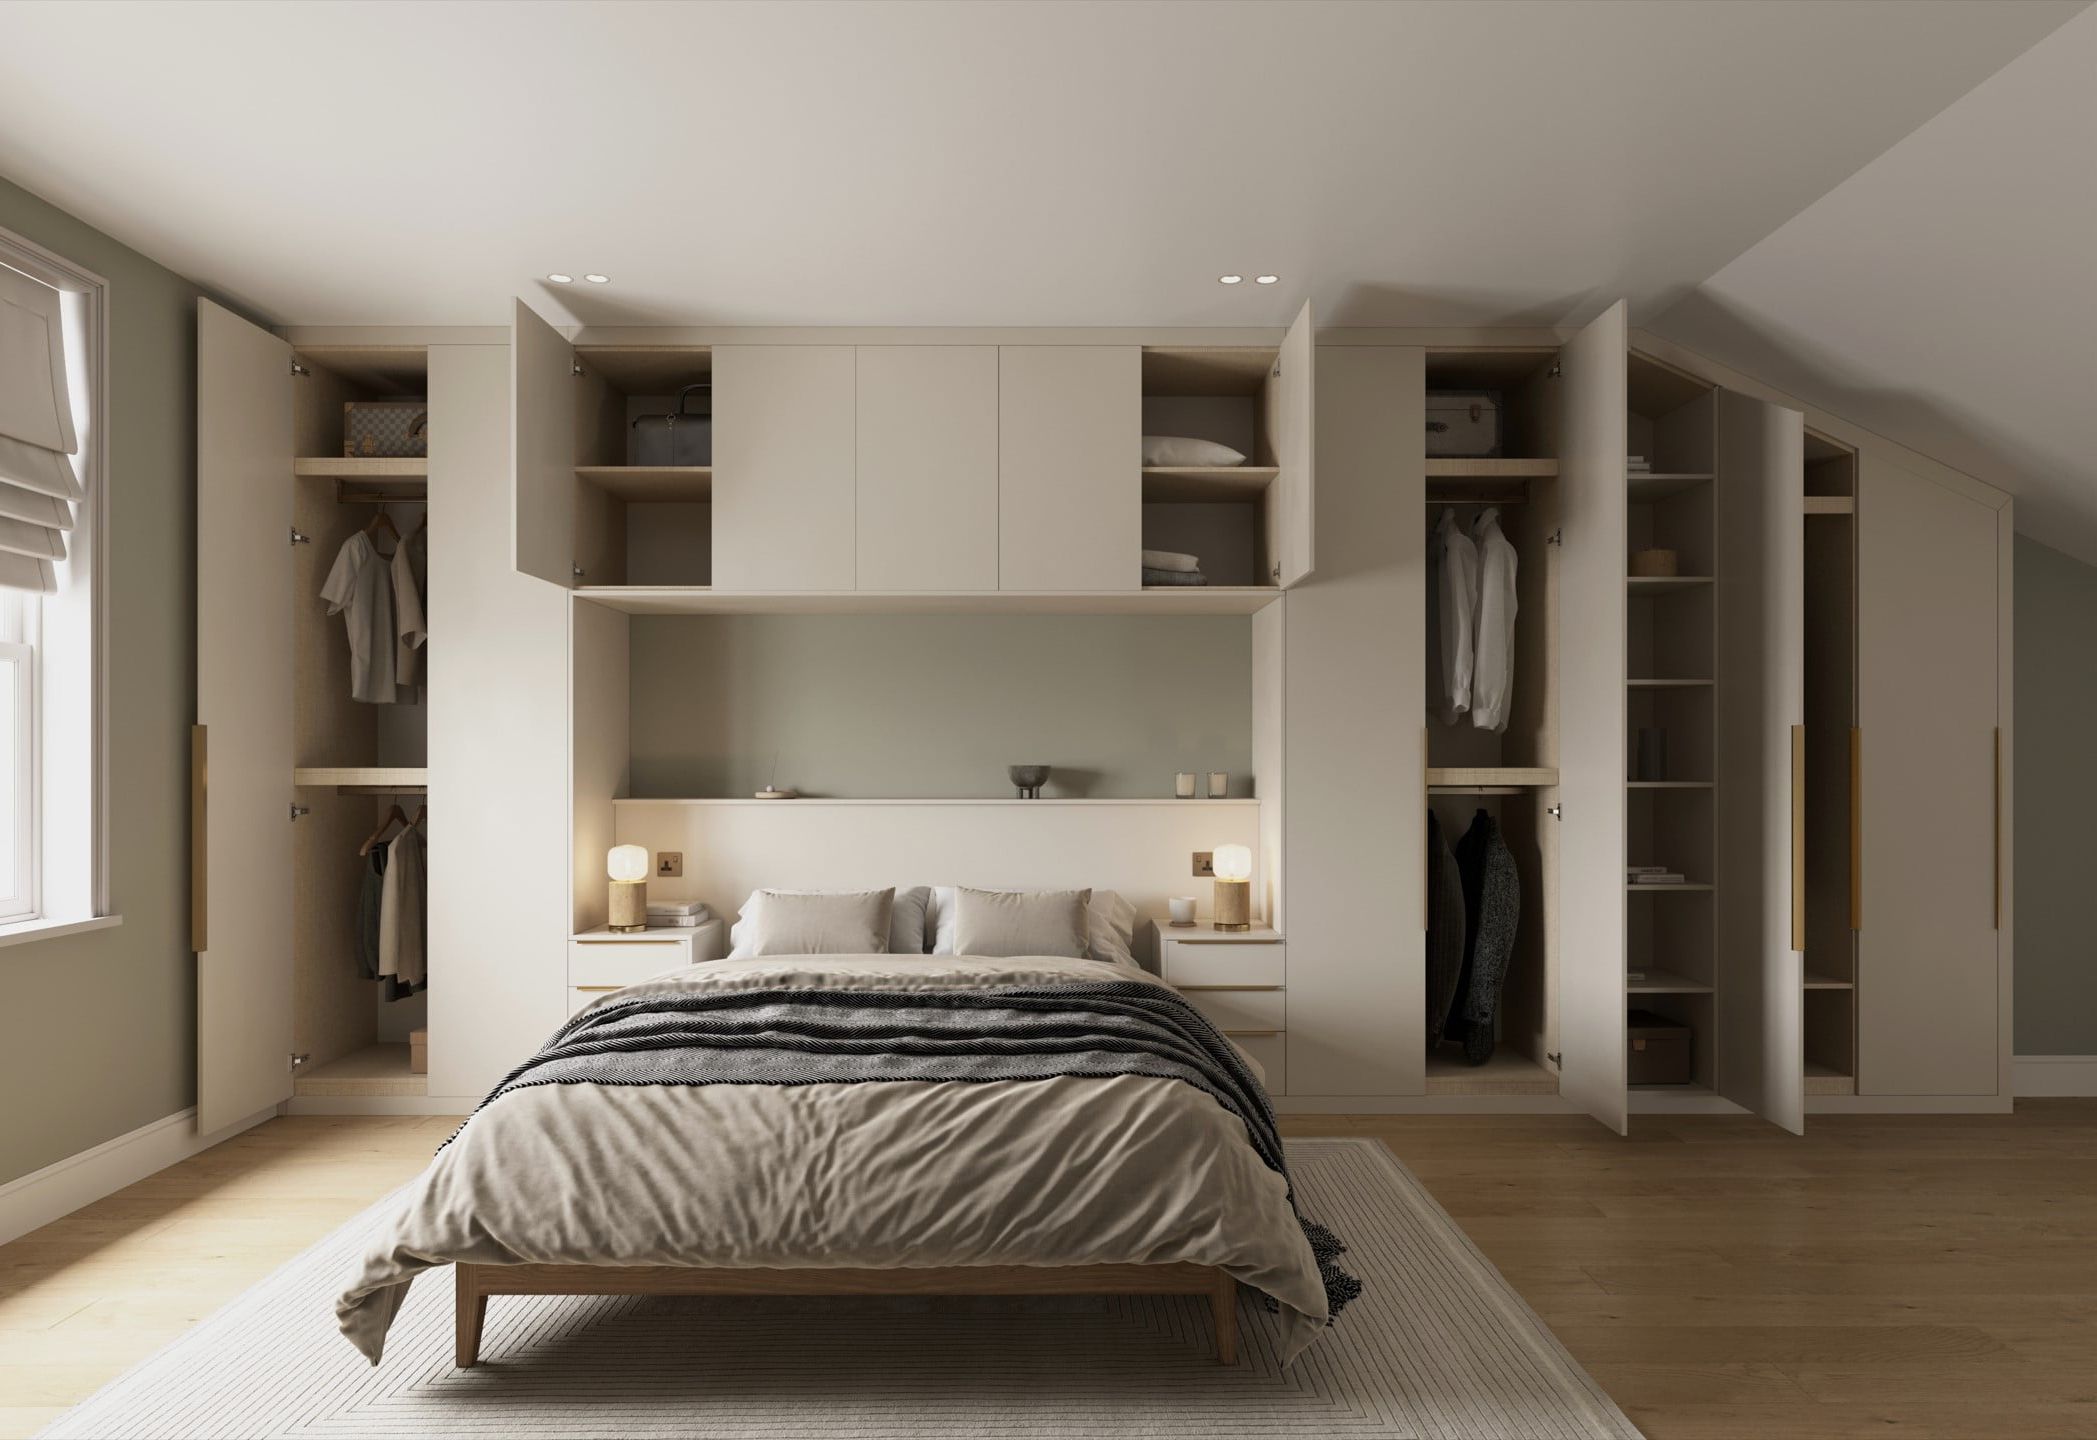 Overbed Fitted Wardrobes And Storage Units, Bespoke Overhead Storage Regarding Overbed Wardrobes (Gallery 9 of 20)